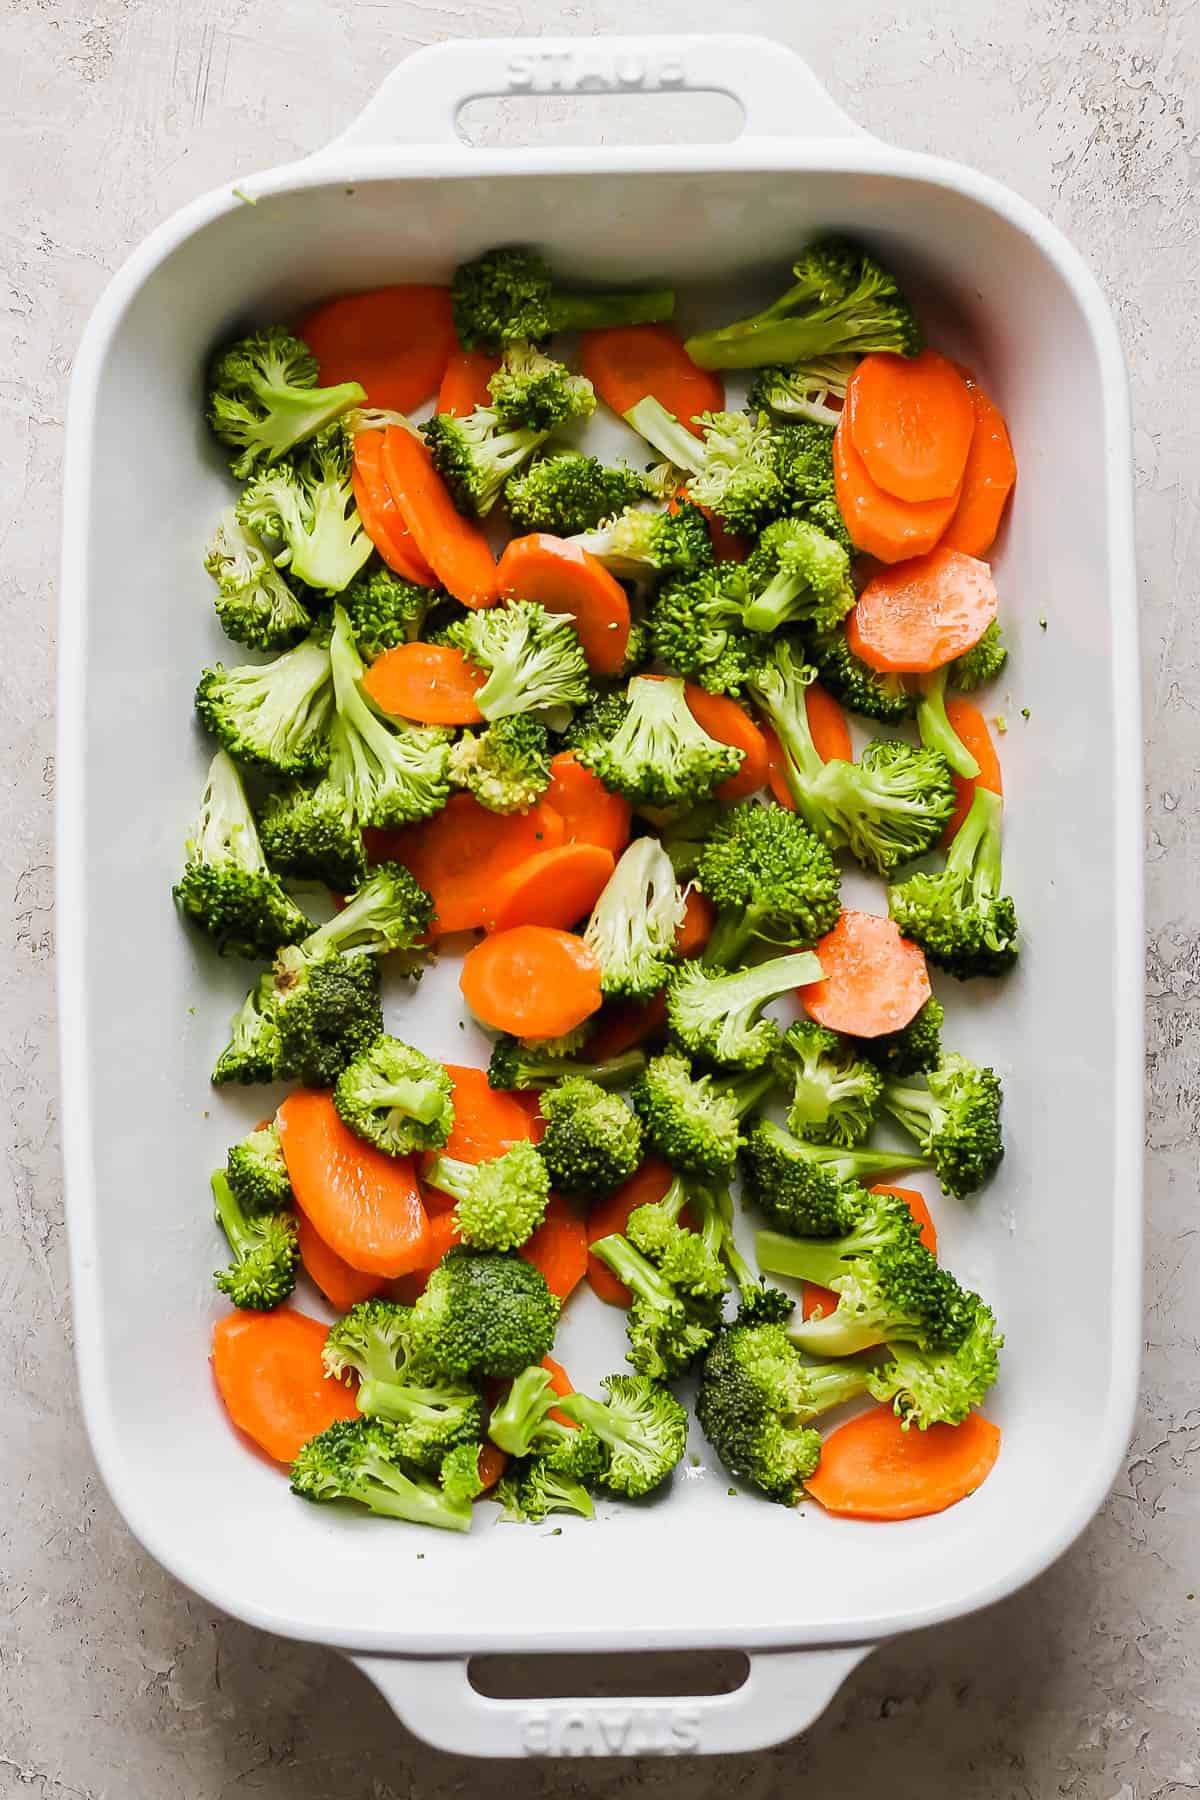 Broccoli florettes and sliced carrots in the bottom of a baking sheet.